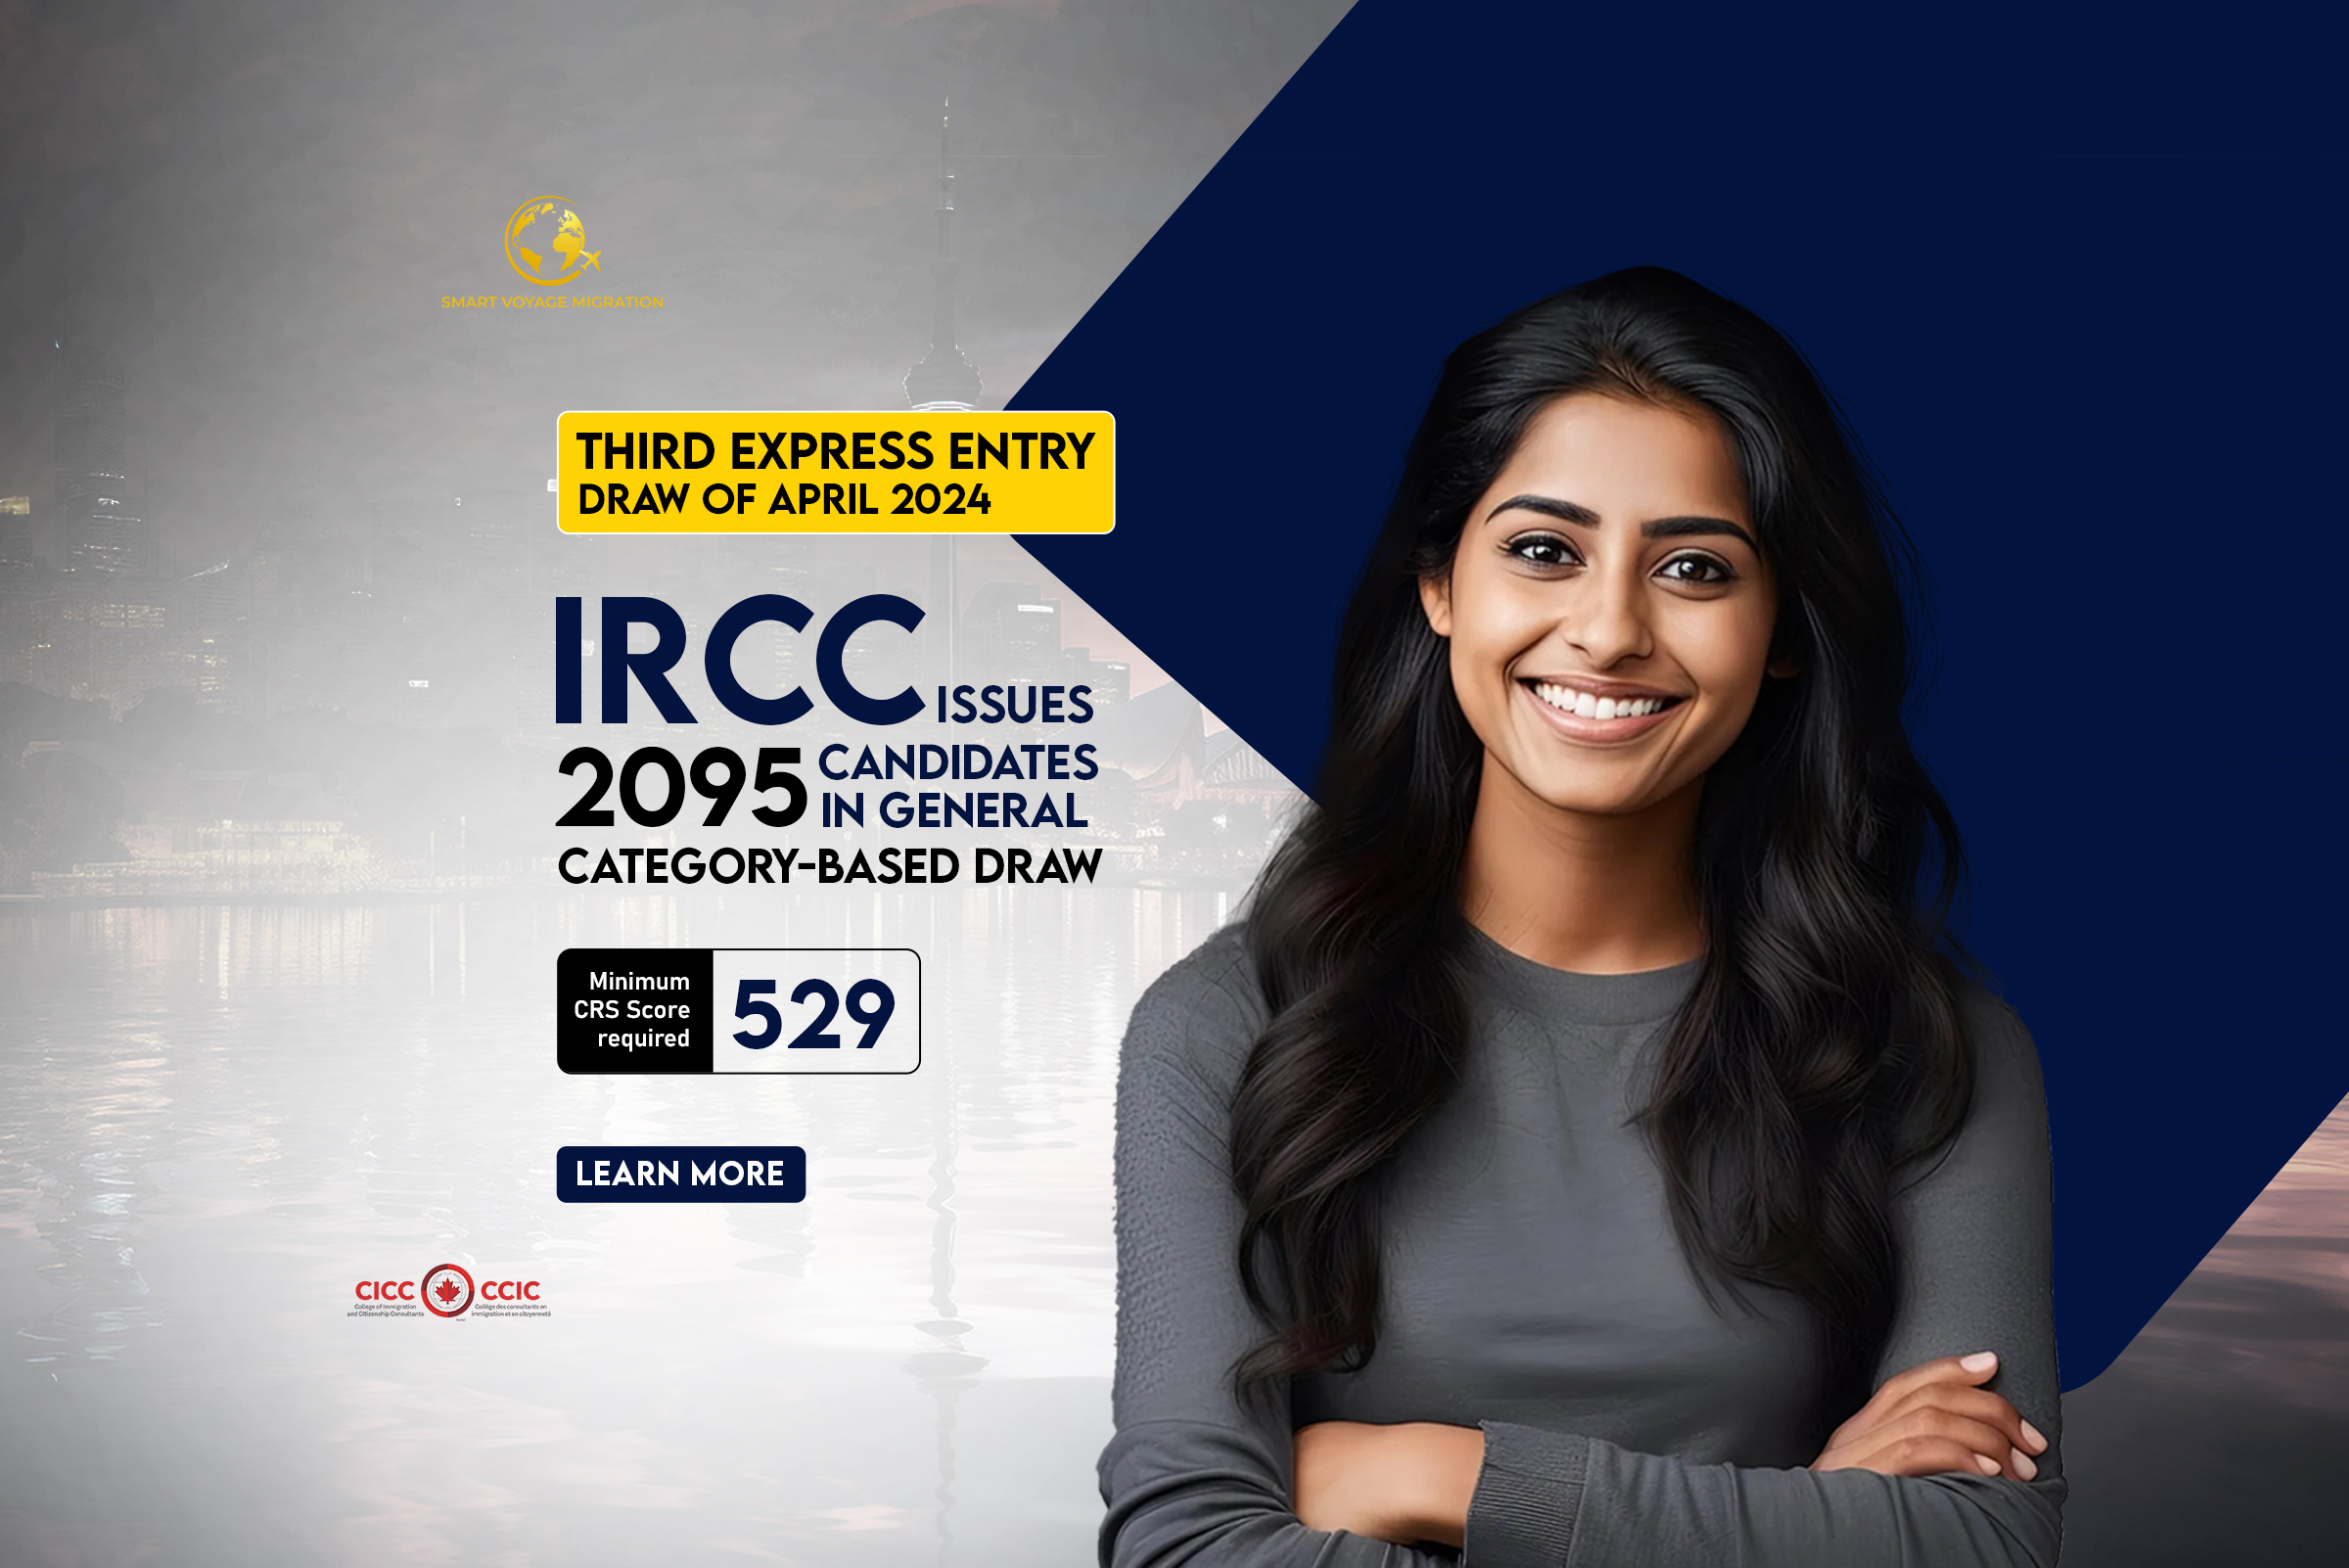 IRCC called out 2095 Invitations in General Category-Based Draw – Opportunity: Third Express Entry Draw of April 2024